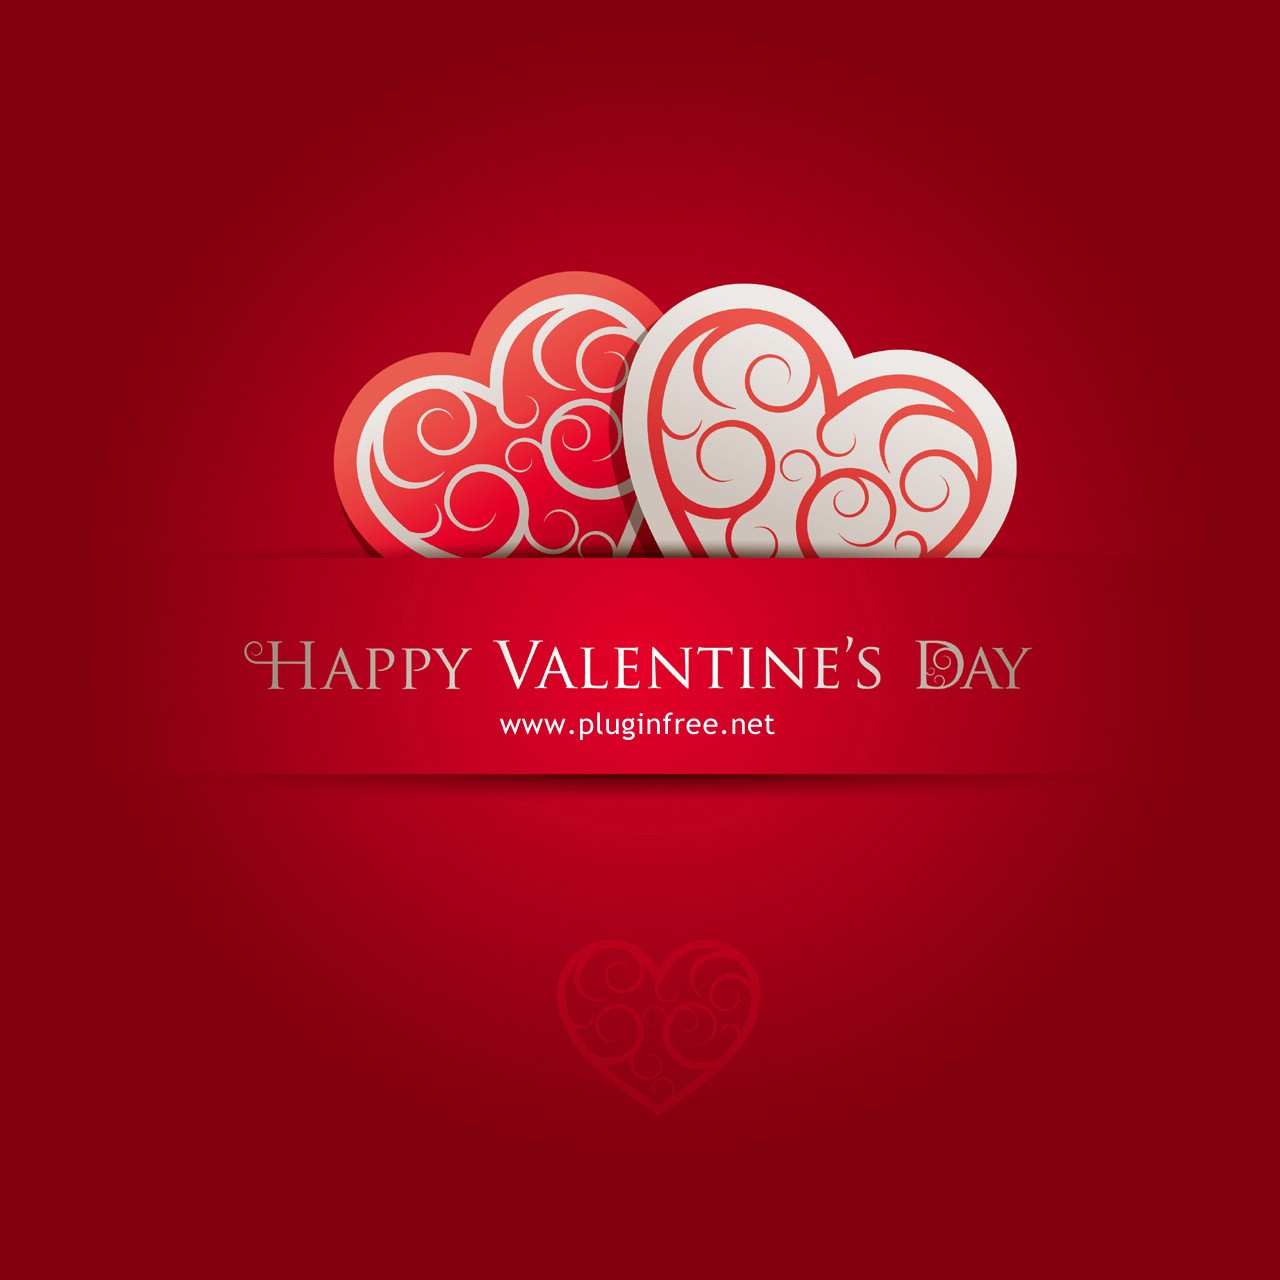 Happy Valentine’s Day Greeting Card Picture